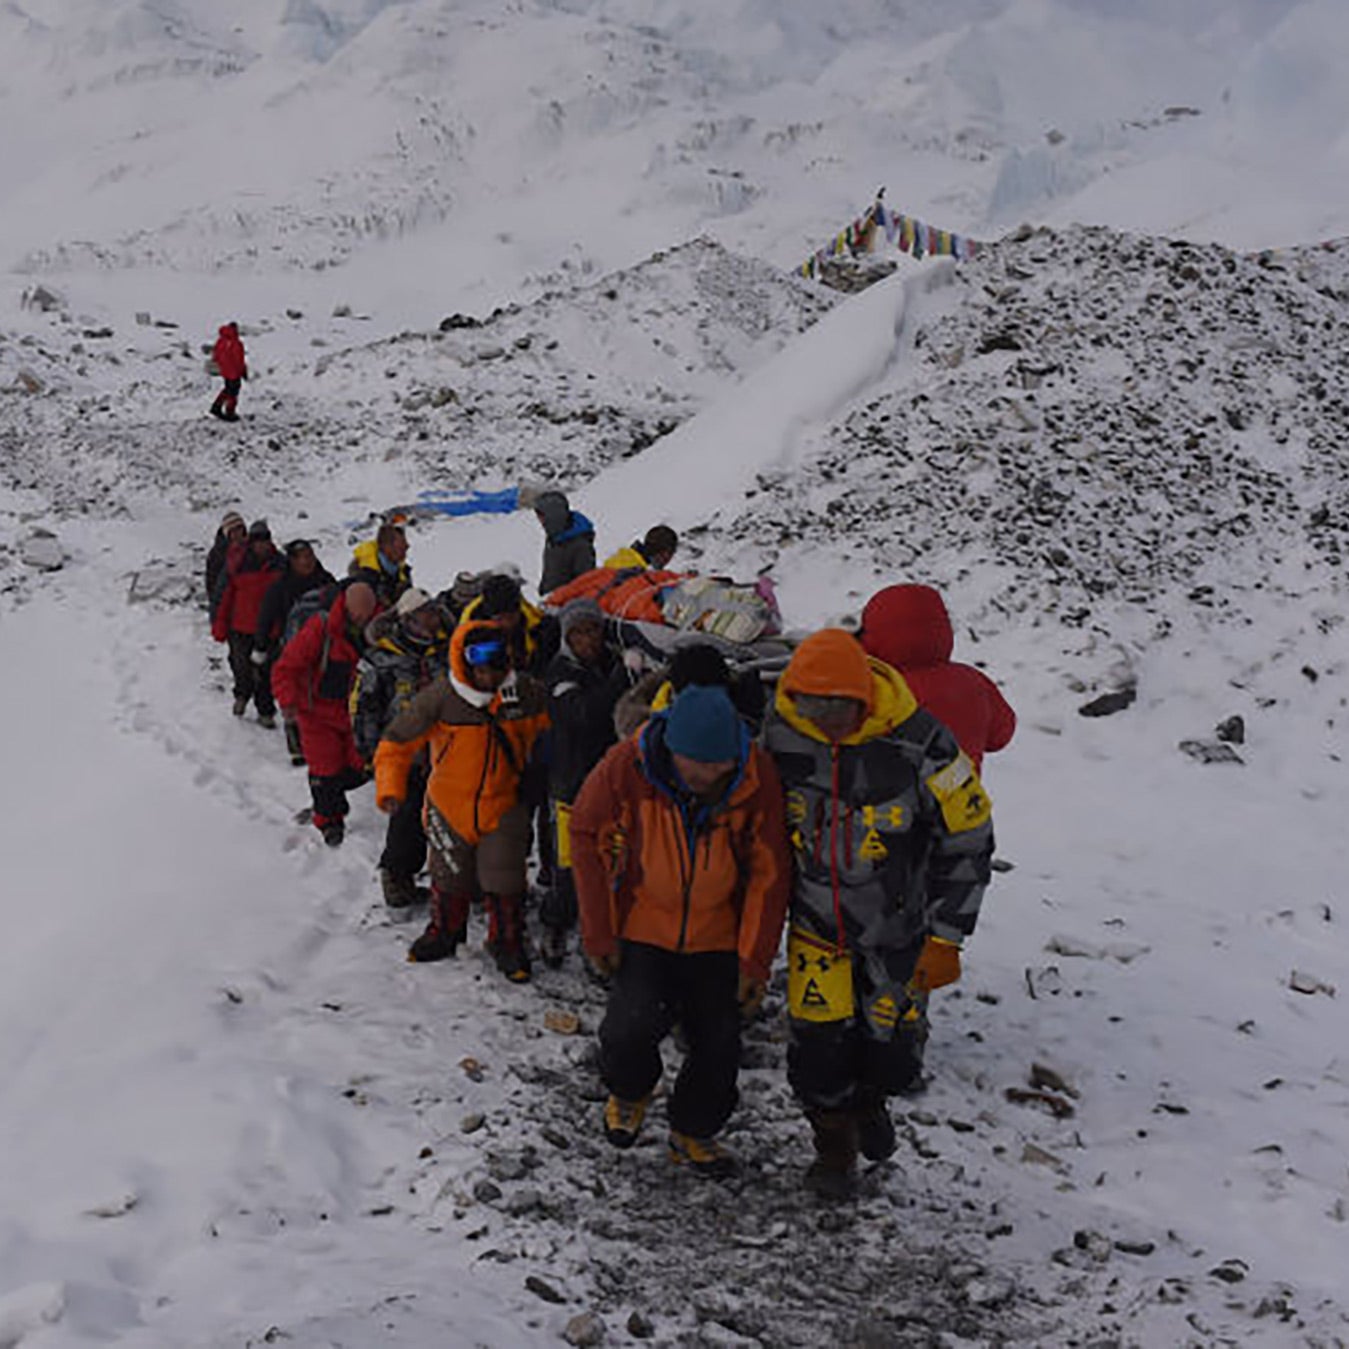 Crews remove a dead body from Mount Everest following a deadly avalanche in 2015.